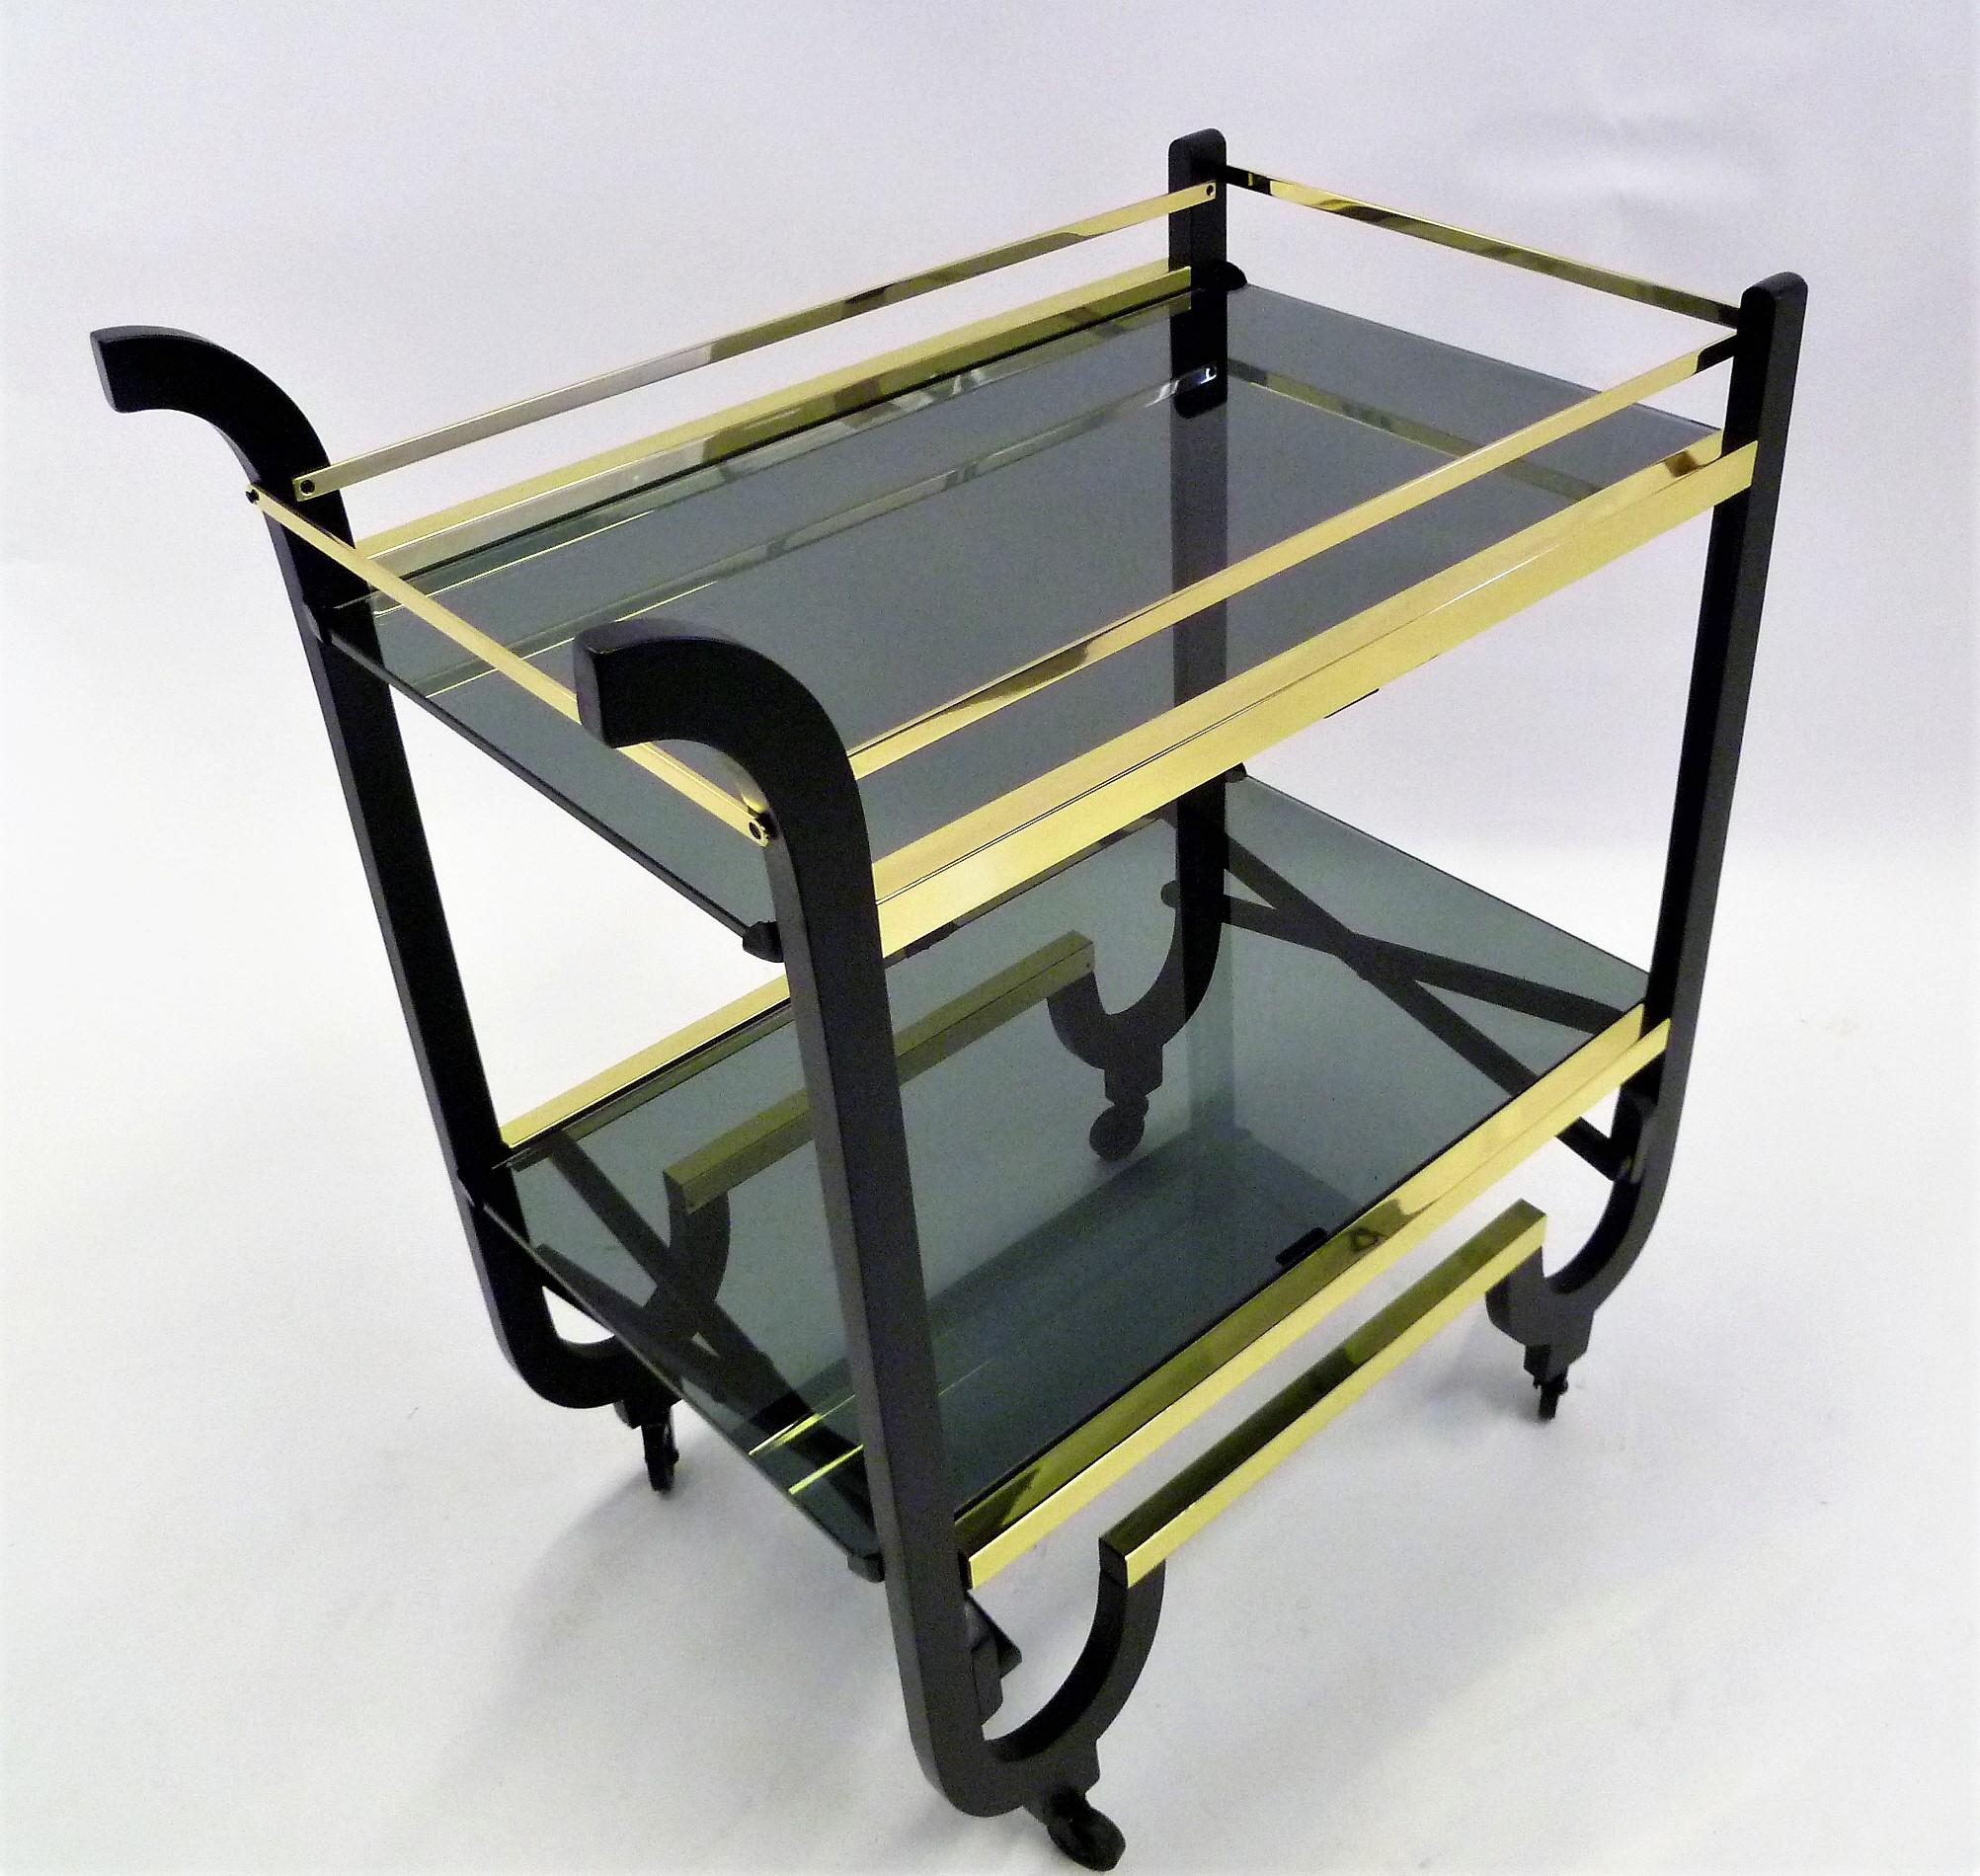 Simply elegant with its brass trims and bars, this 1940s rolling streamline moderne cart features two smoked glass surfaced shelves, Black enameled wood and when the glass shelves are removed, collapsible for storage. Brasses professionally